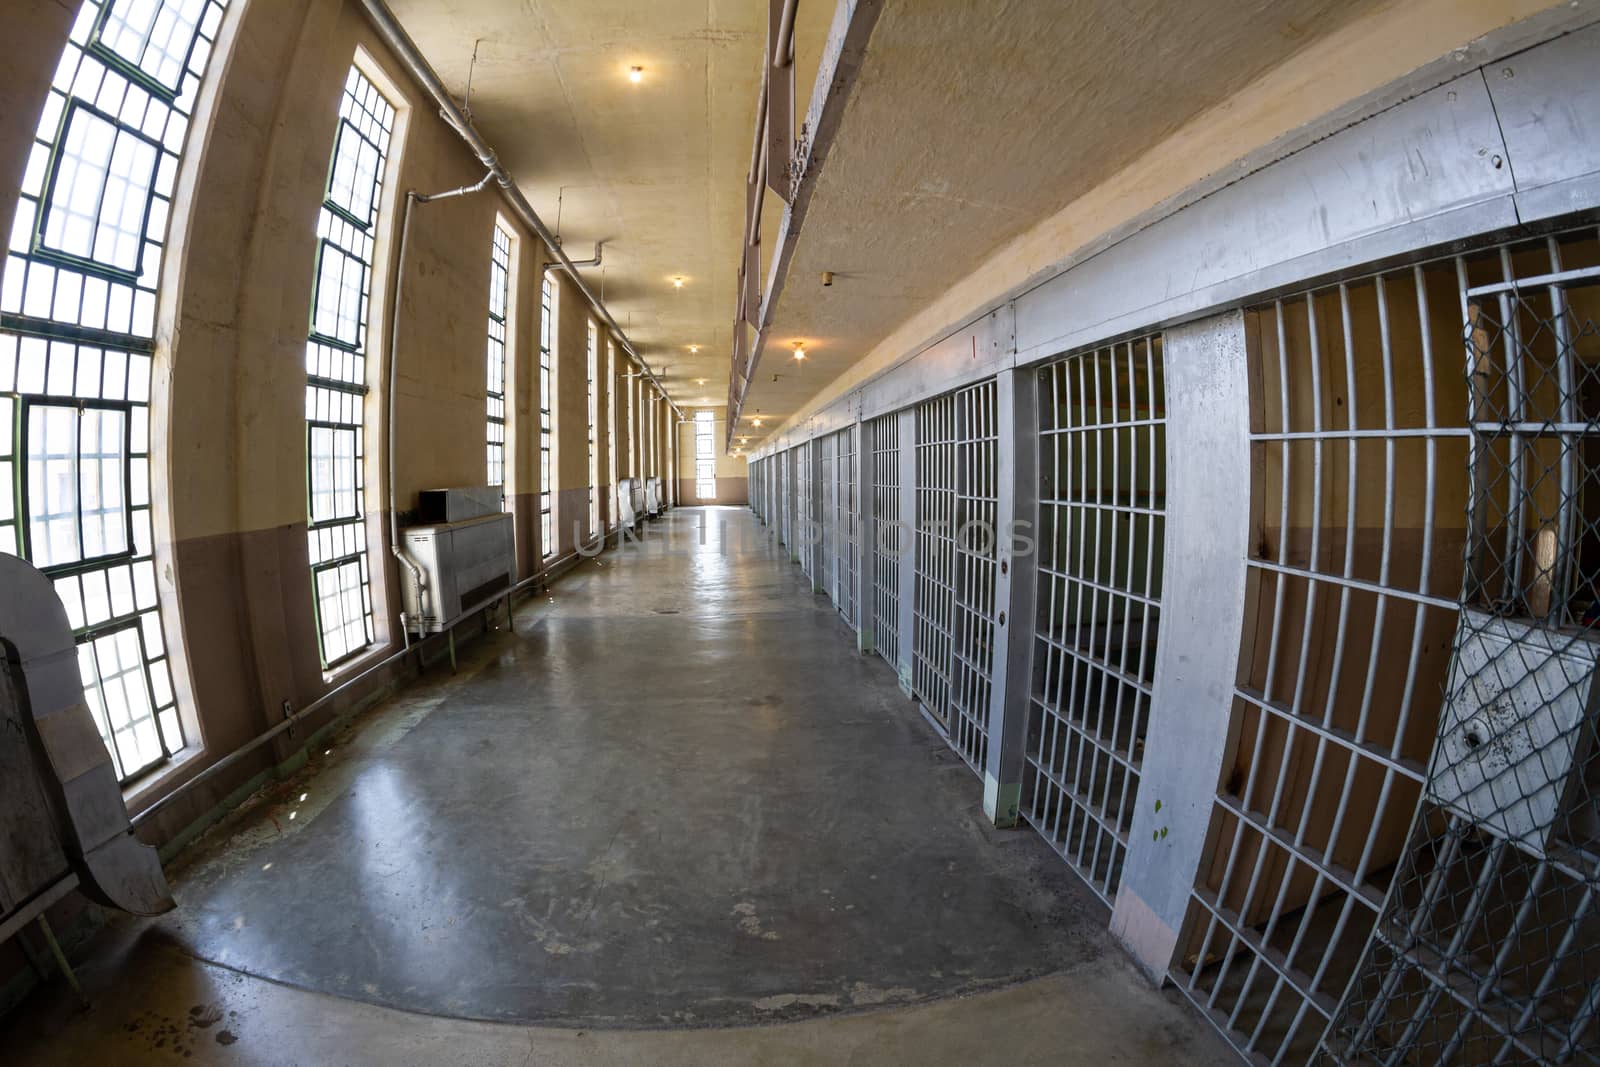 hallway of a prison with distortion from a fisheye lens